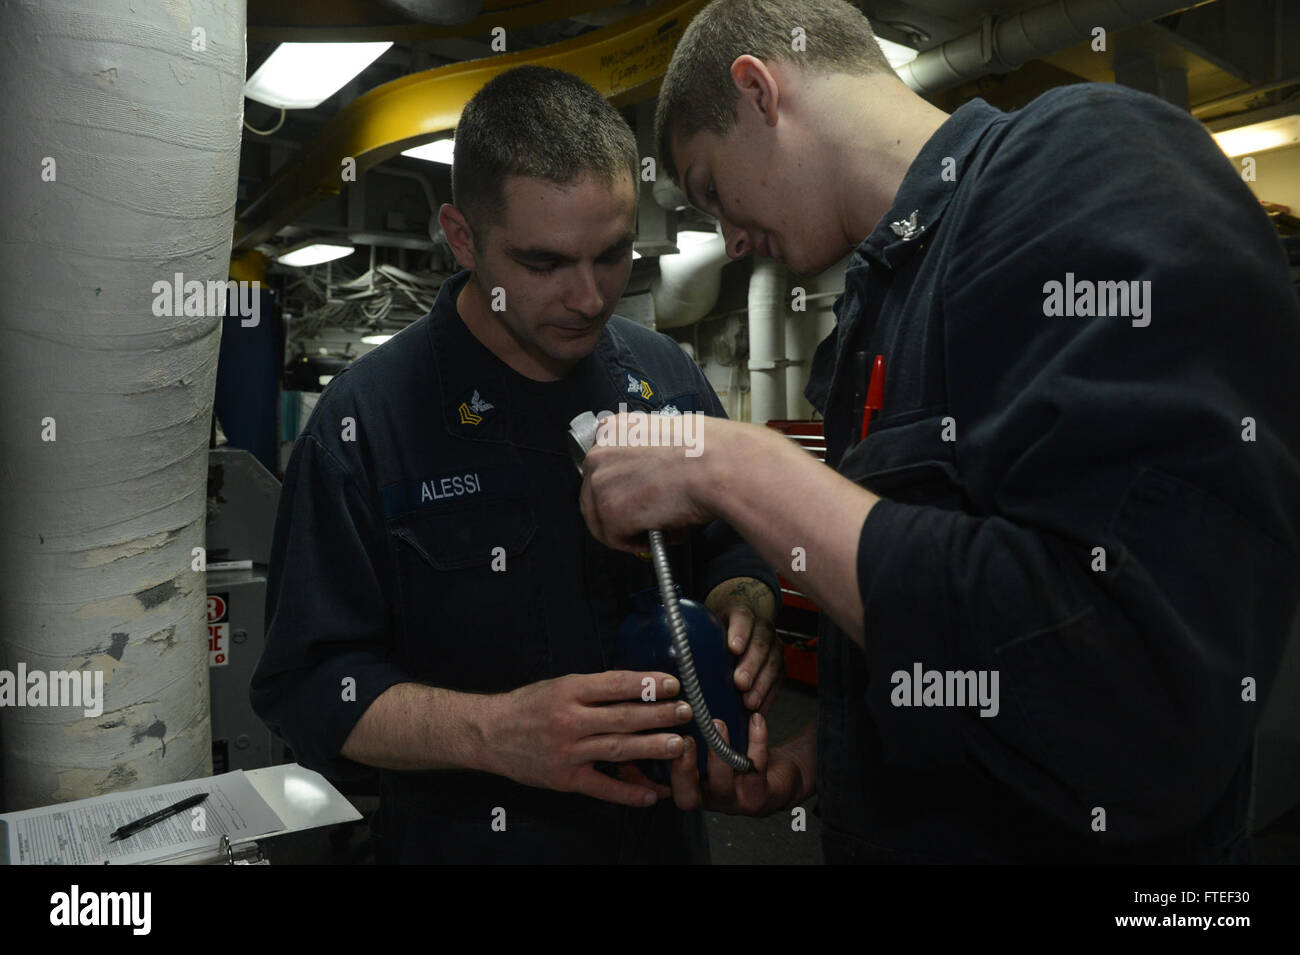 140616-N-MW280-381 MEDITERRANEAN SEA (June 16, 2014) -- Machinist's Mate 1st Class Jared Alessi, from Buffalo, N.Y., supervises a spot check performed by Machinist's Mate 3rd Class Jordan Gilling, from Saginaw, Mich., in the assault shop aboard the multipurpose amphibious assault ship USS Bataan (LHD 5). Bataan, with elements of the 22nd Marine Expeditionary Unit, is operating in the U.S. 6th Fleet area of operations to augment U.S. Crisis Response forces in the region.  (U.S. Navy photo by Mass Communication Specialist 3rd Class Chase Hawley/Released) Stock Photo